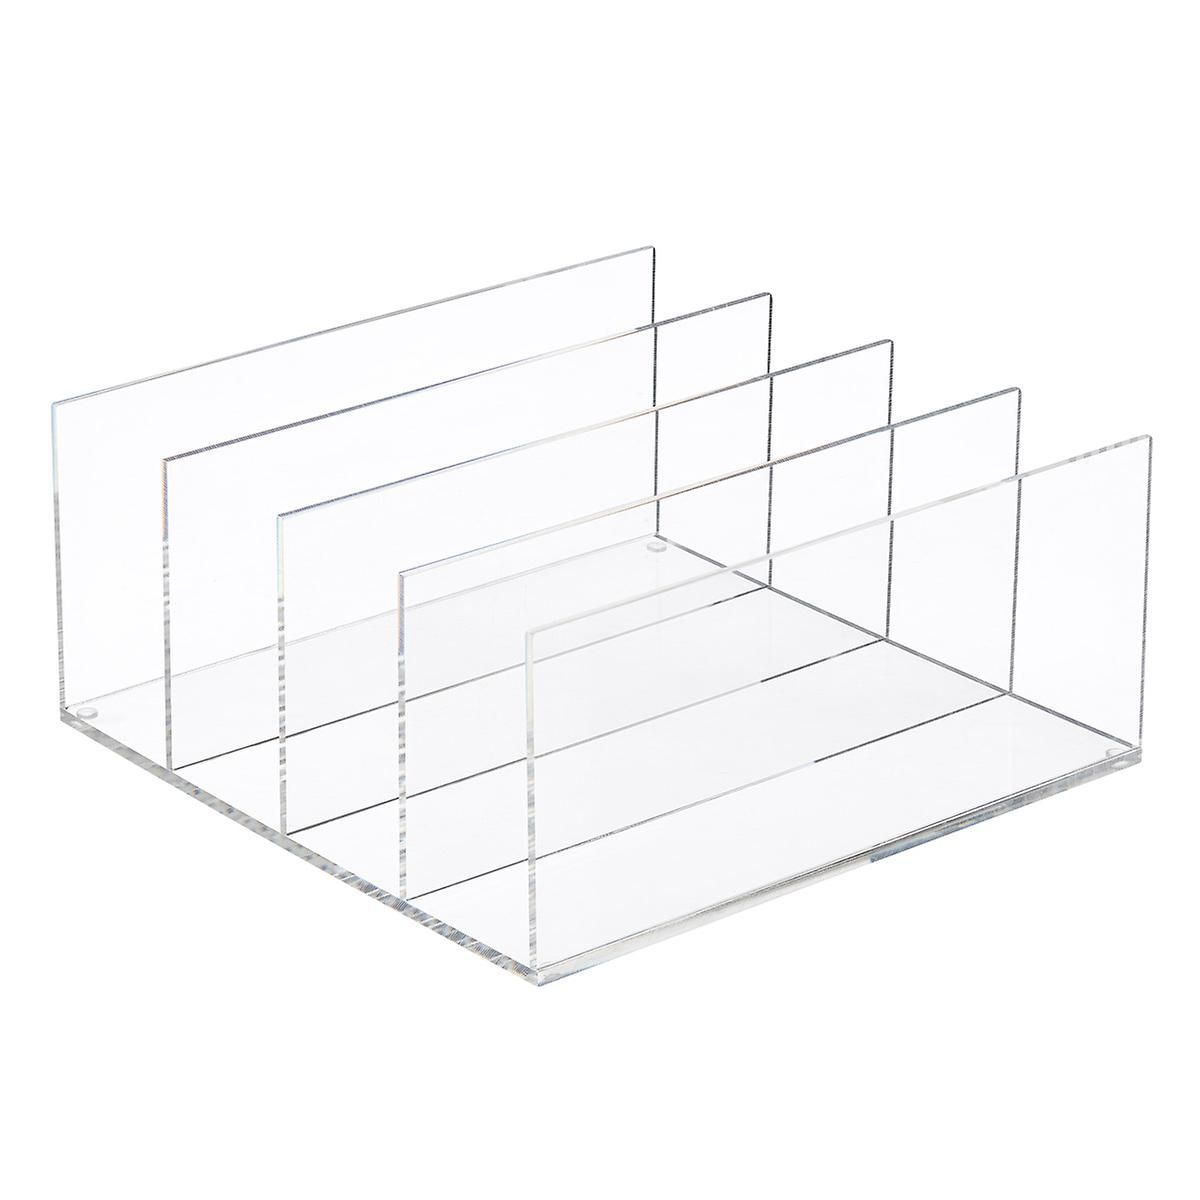 Acrylic 4-Section Purse Storage Organizer | The Container Store